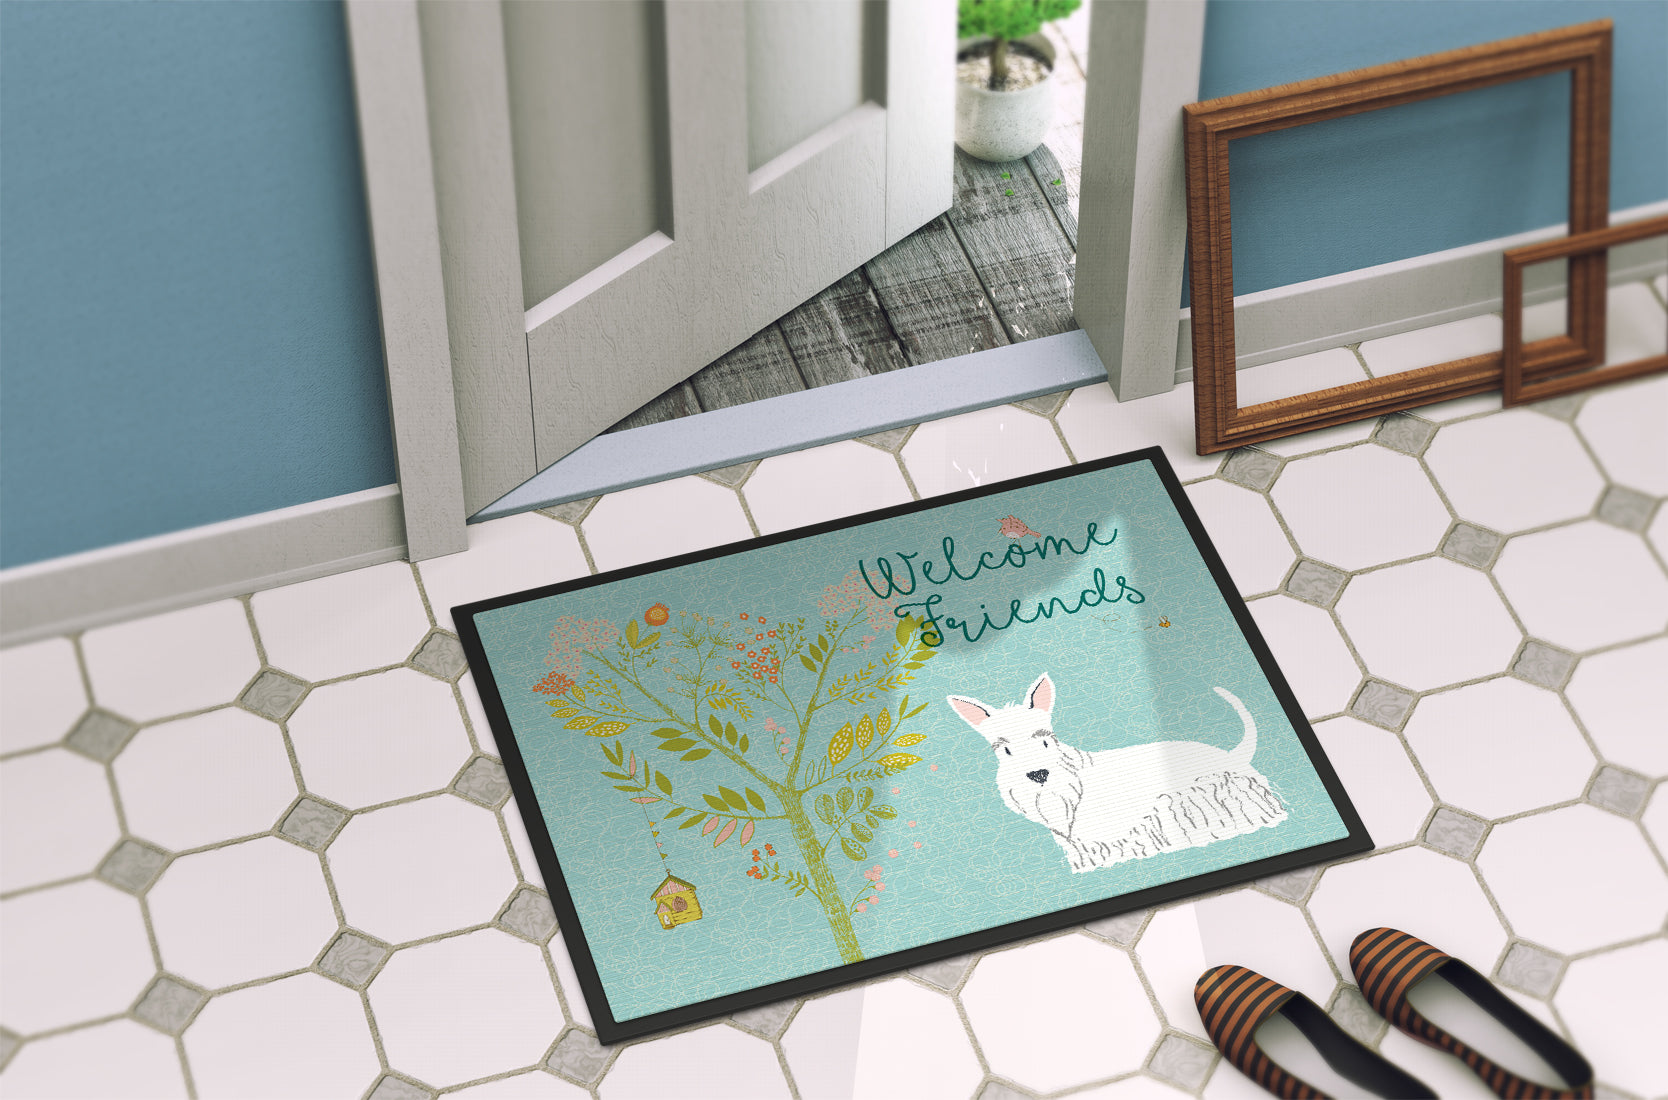 Welcome Friends White Scottish Terrier Indoor or Outdoor Mat 18x27 BB7617MAT - the-store.com